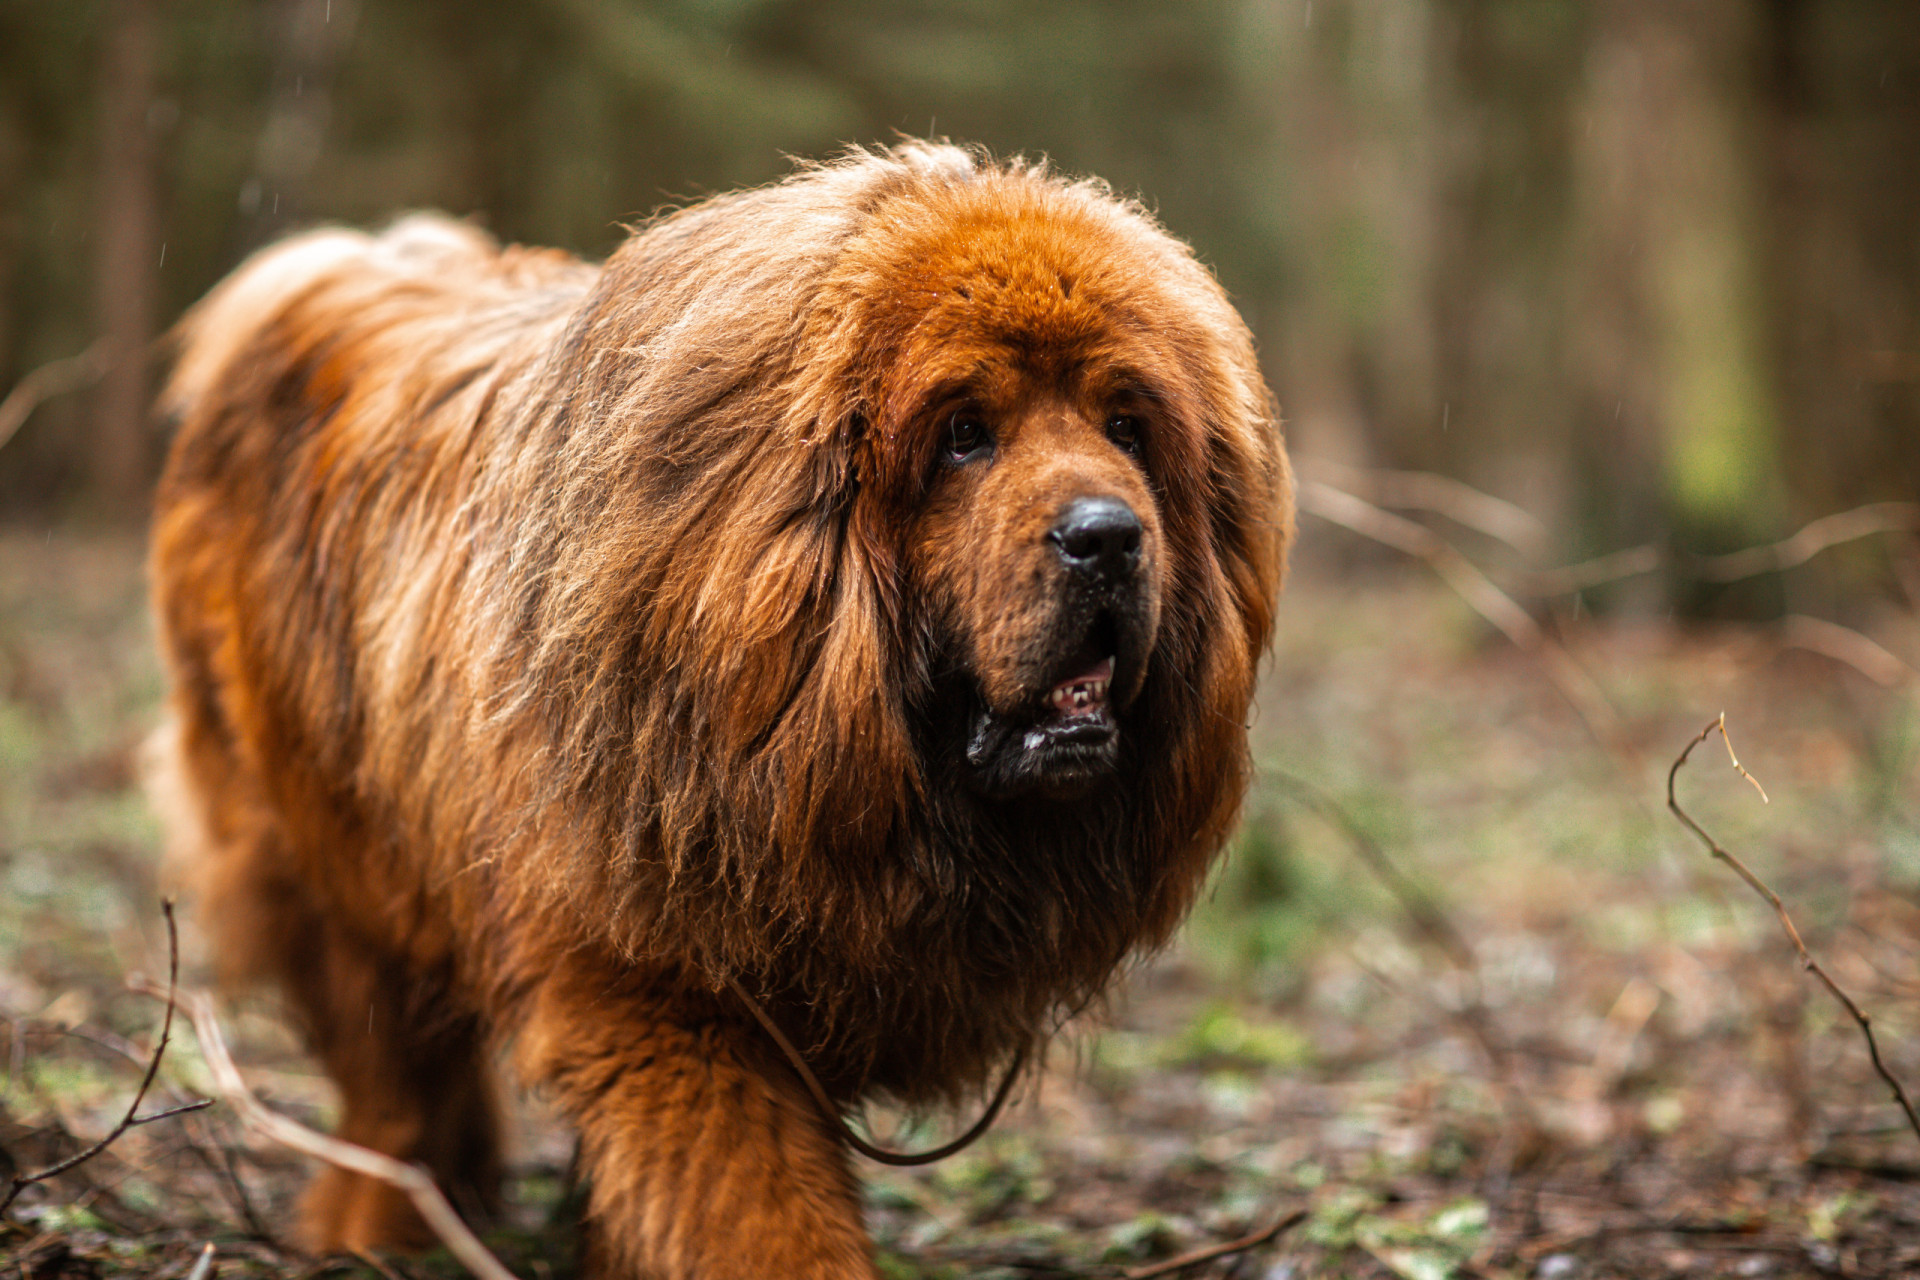 The fluffiest dog breeds that were made to snuggle